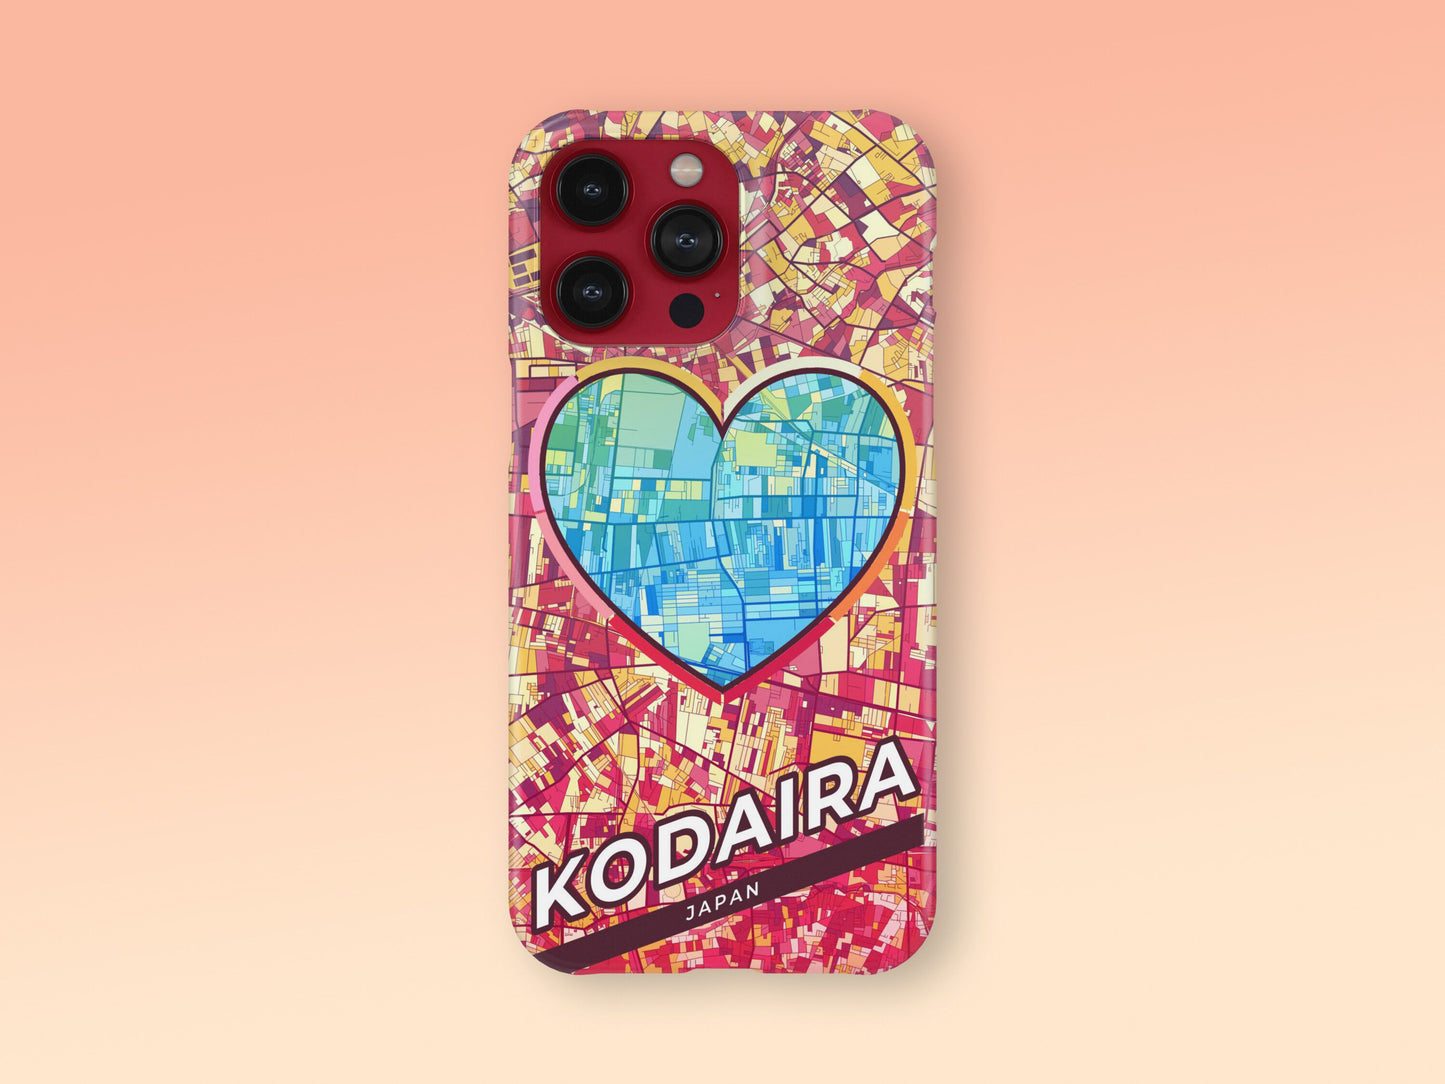 Kodaira Japan slim phone case with colorful icon. Birthday, wedding or housewarming gift. Couple match cases. 2